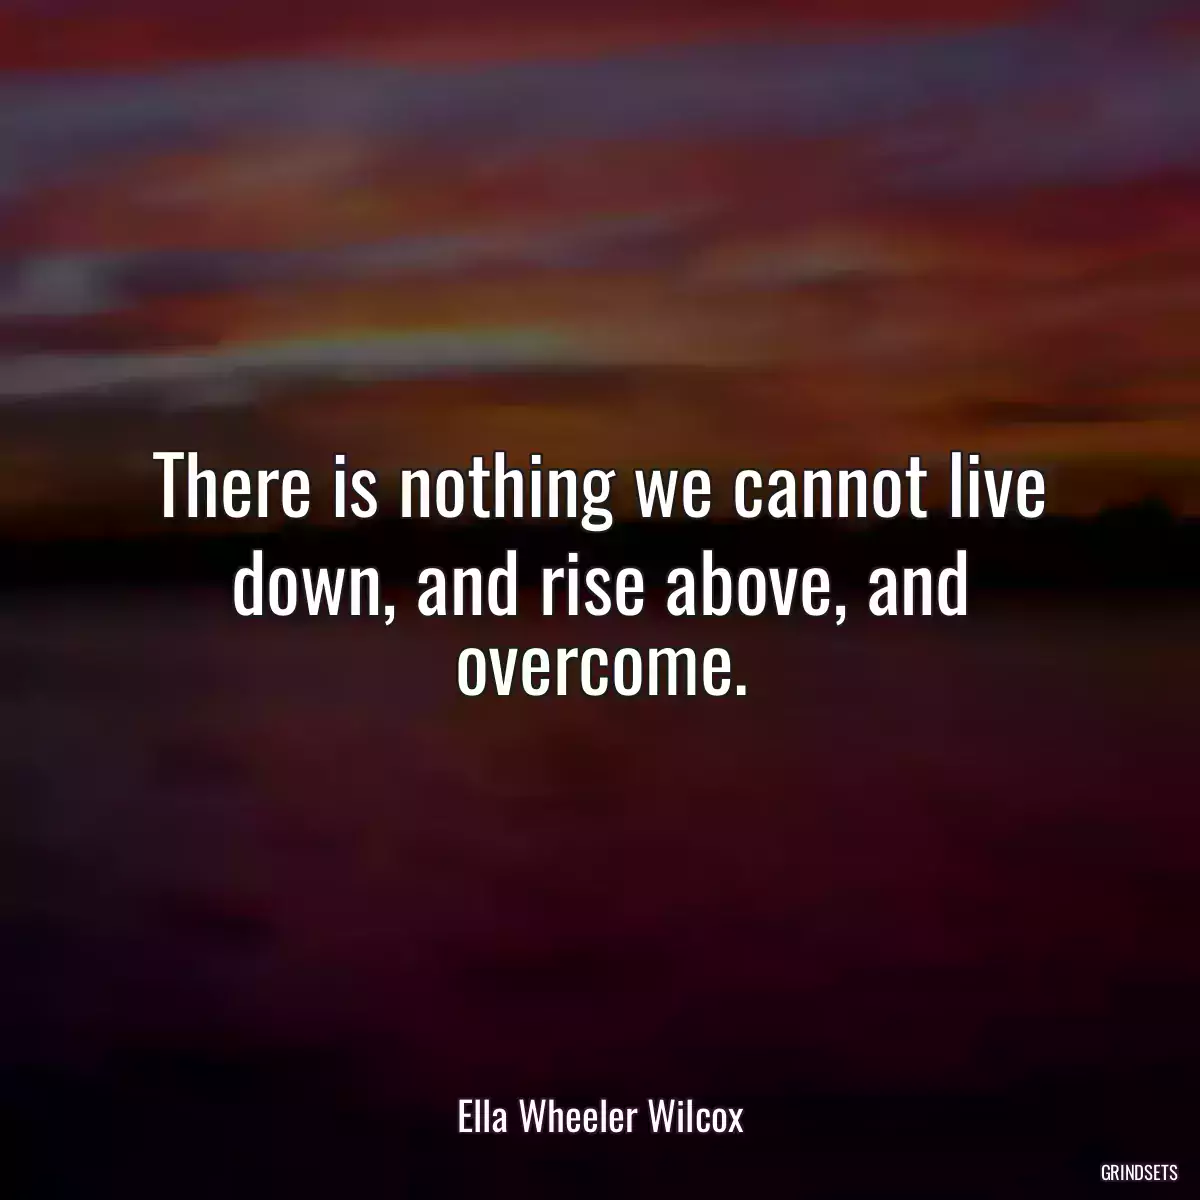 There is nothing we cannot live down, and rise above, and overcome.